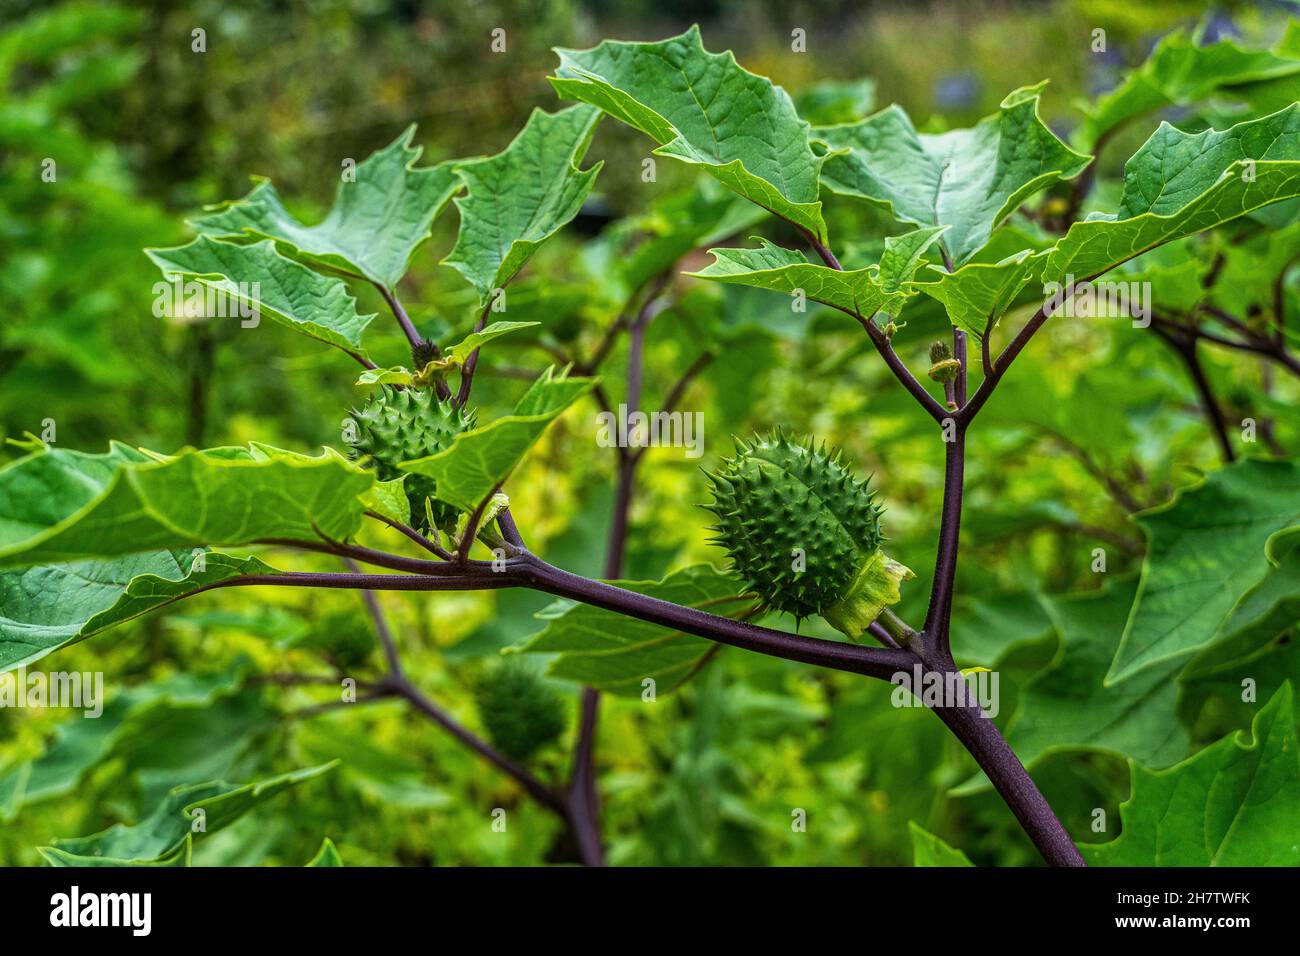 The common thorn tree, Datura stramonium L., is a flowering plant belonging to the Solanaceae family. is a highly poisonous plant. Denmark Stock Photo